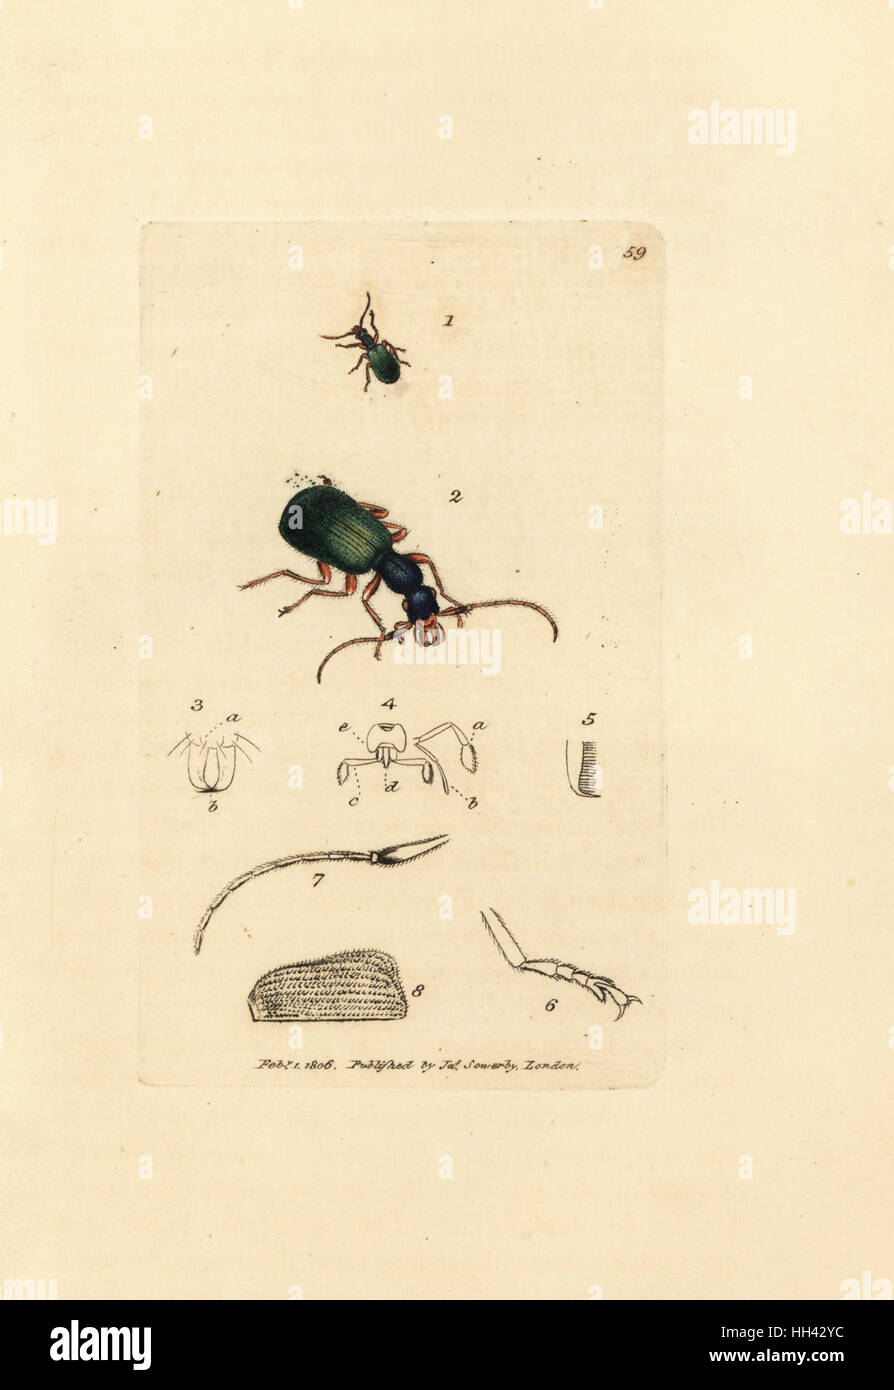 Ground beetle, Drypta dentata (Golden-mouthed carabus, Carabus chrysostomos). Handcoloured copperplate engraving by James Sowerby from The British Miscellany, or Coloured figures of new, rare, or little known animal subjects, London, 1804. Stock Photo